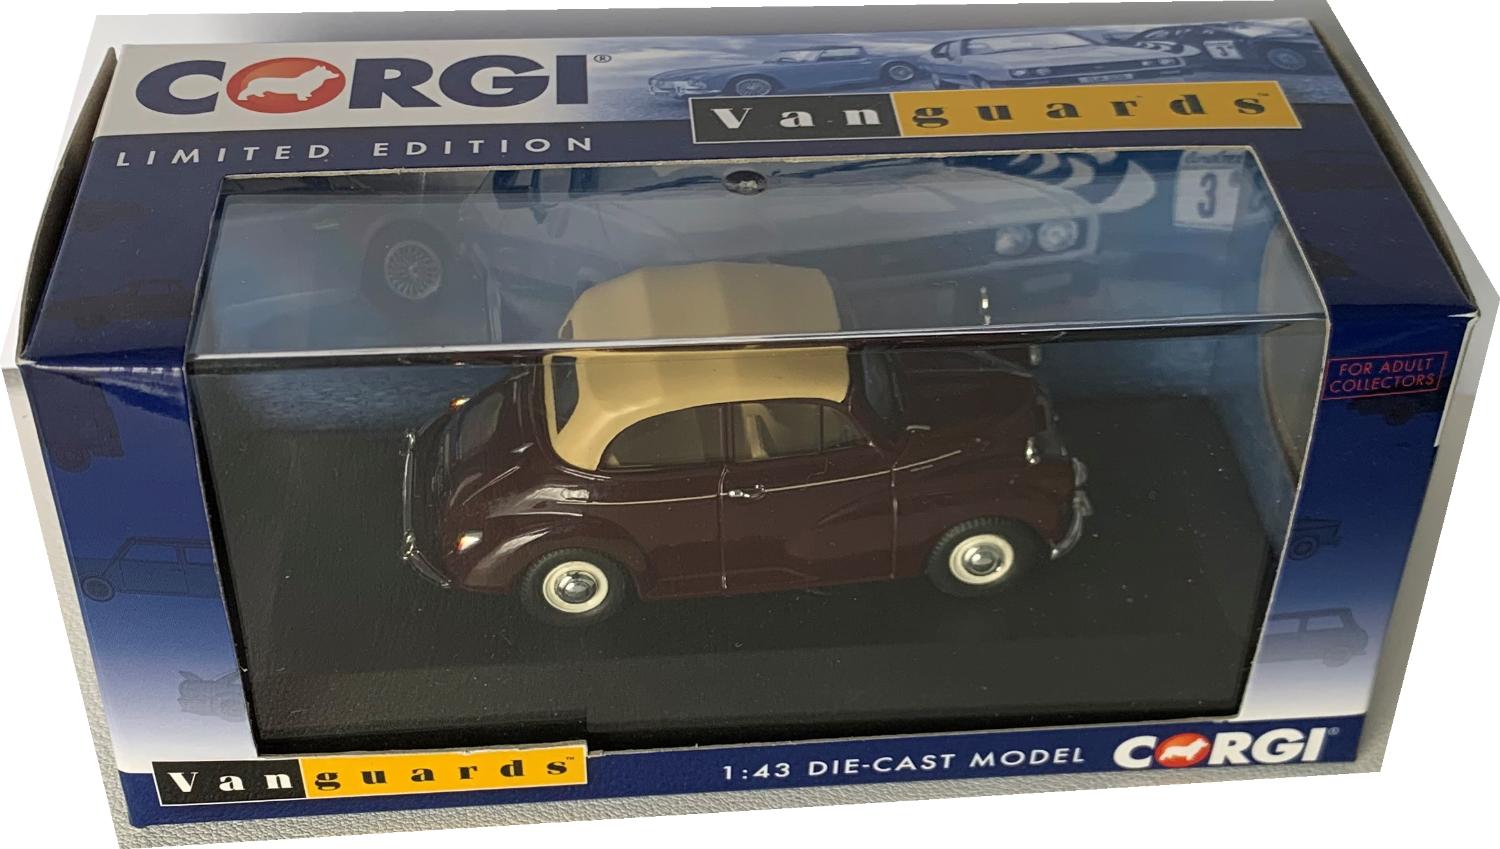 Morris Minor 1000 Convertible in maroon with tan roof,  1:43 scale model from Corgi Vanguards , limited edition model